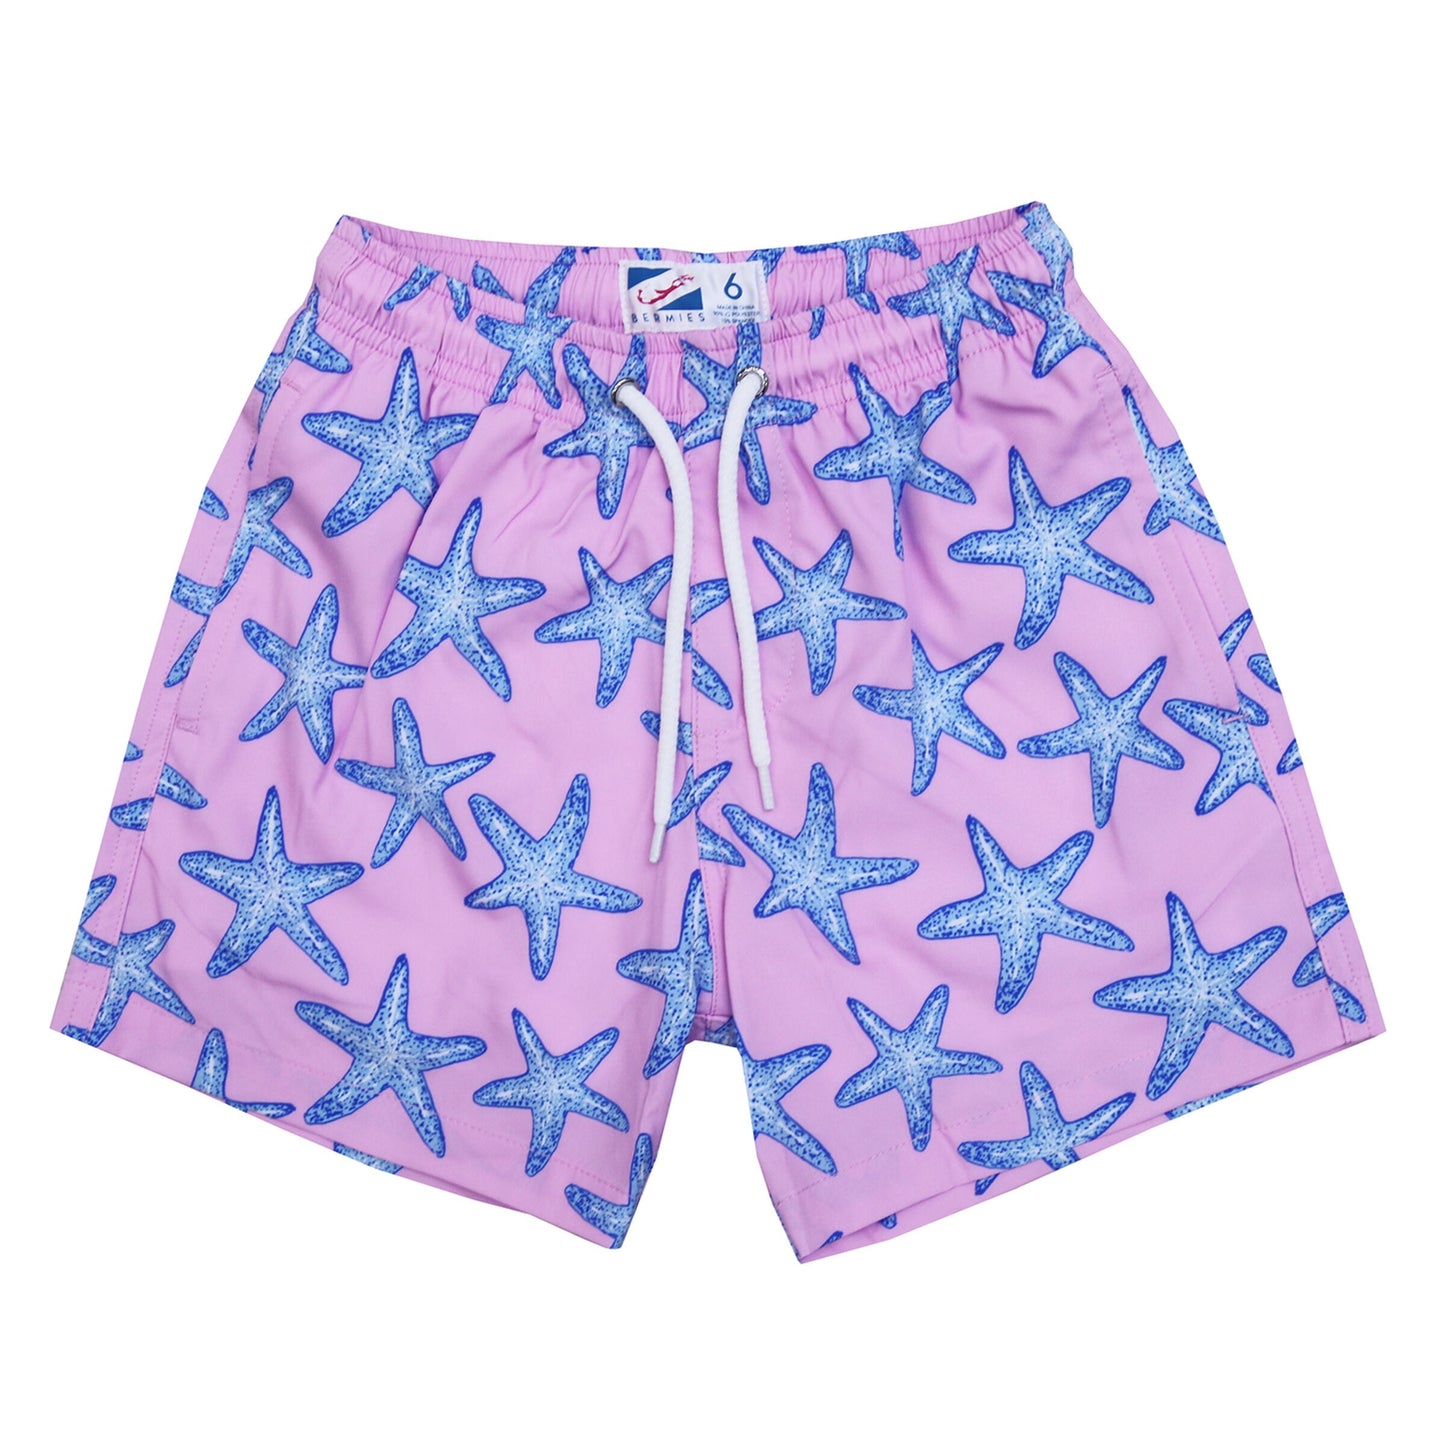 Boys Swim Trunks with Compression Liner